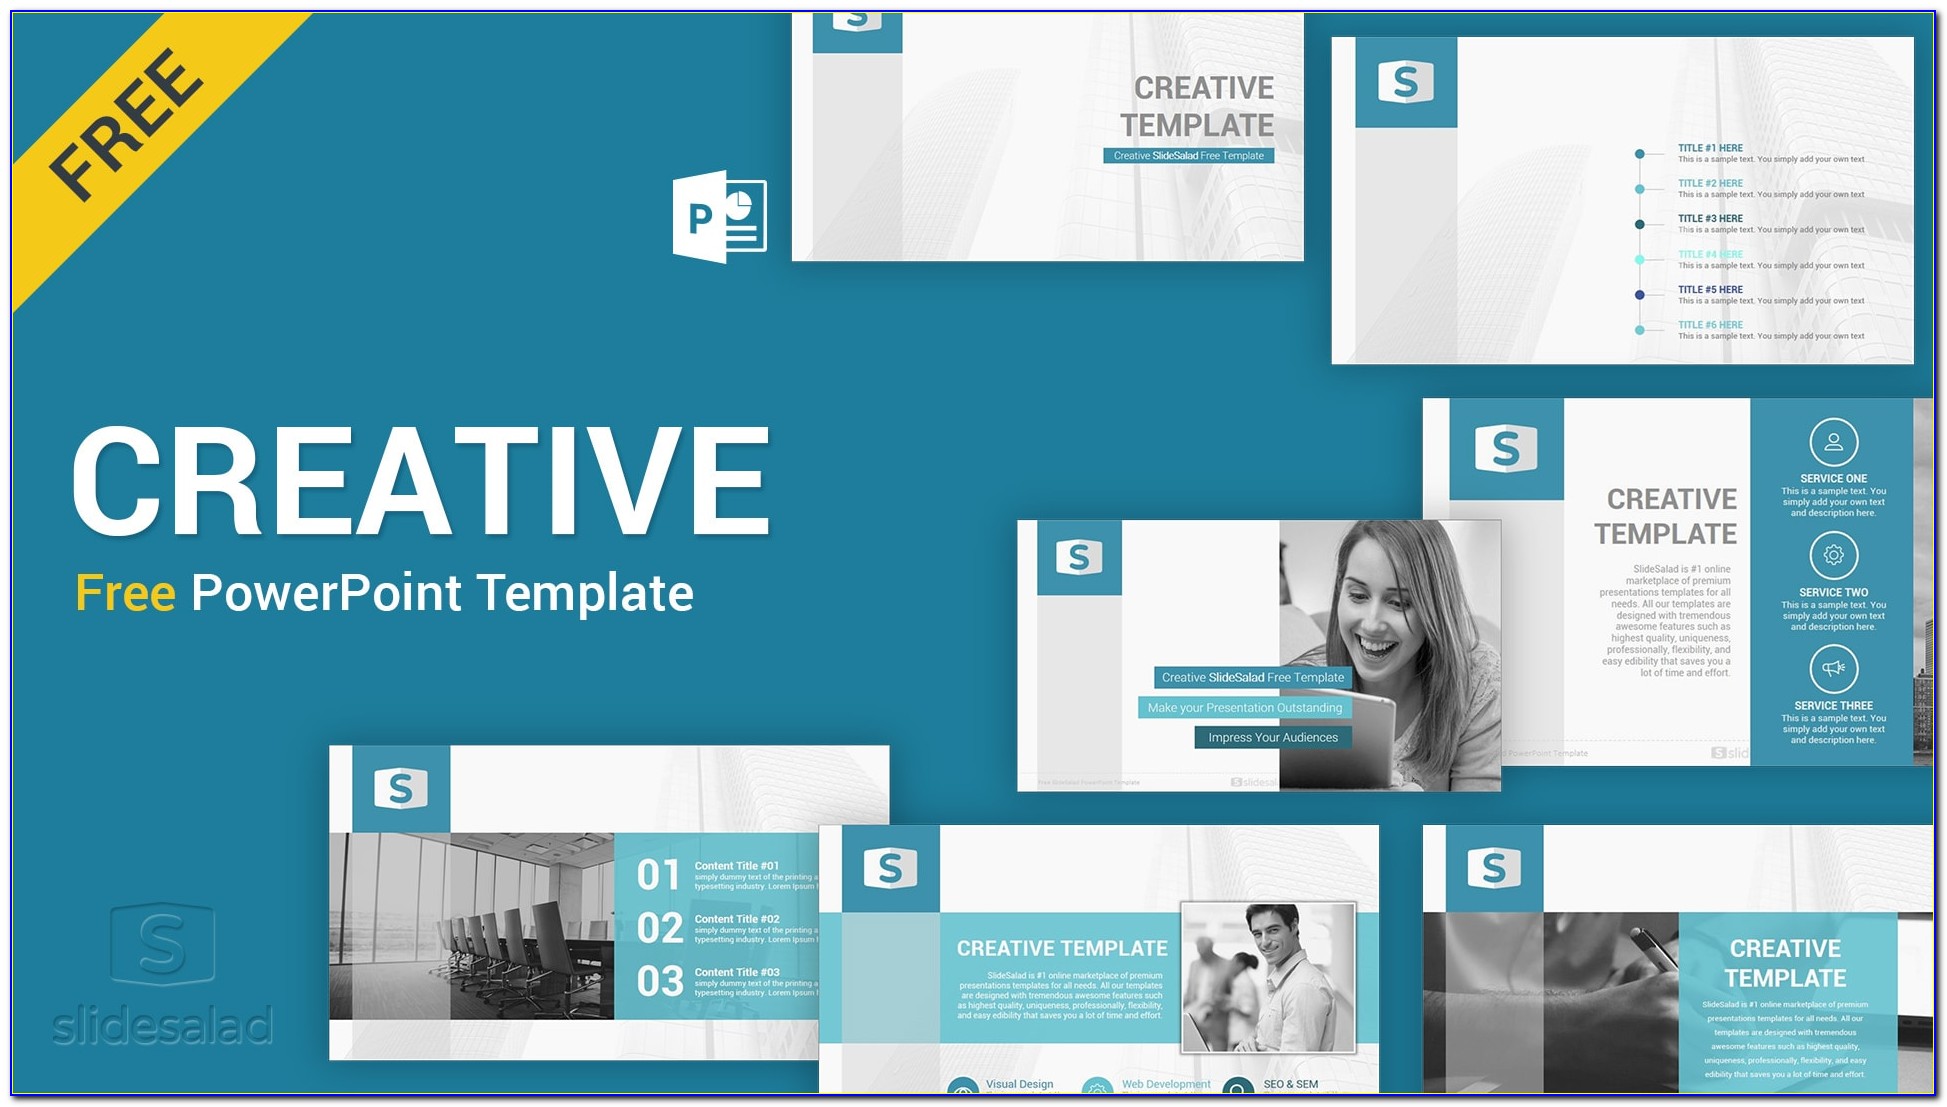 Download Powerpoint Template Free 2019